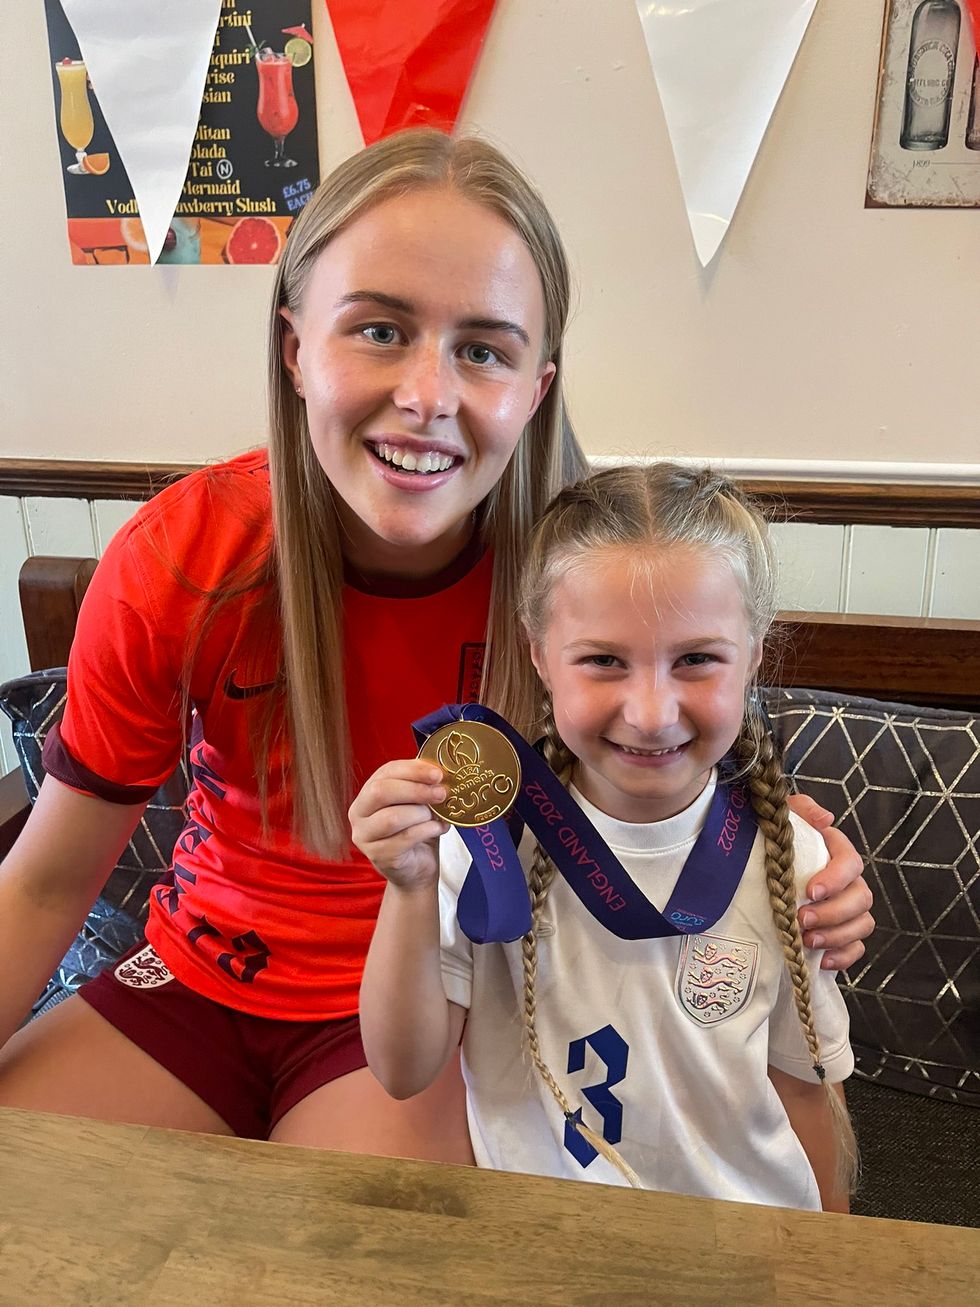 Harper Mills, 6, met one of her hero's - Aston Villa women goalkeeper Hannah Hampton, who was on the substitutes\u2019 bench for the dramatic final match. (Lou Mills/PA)